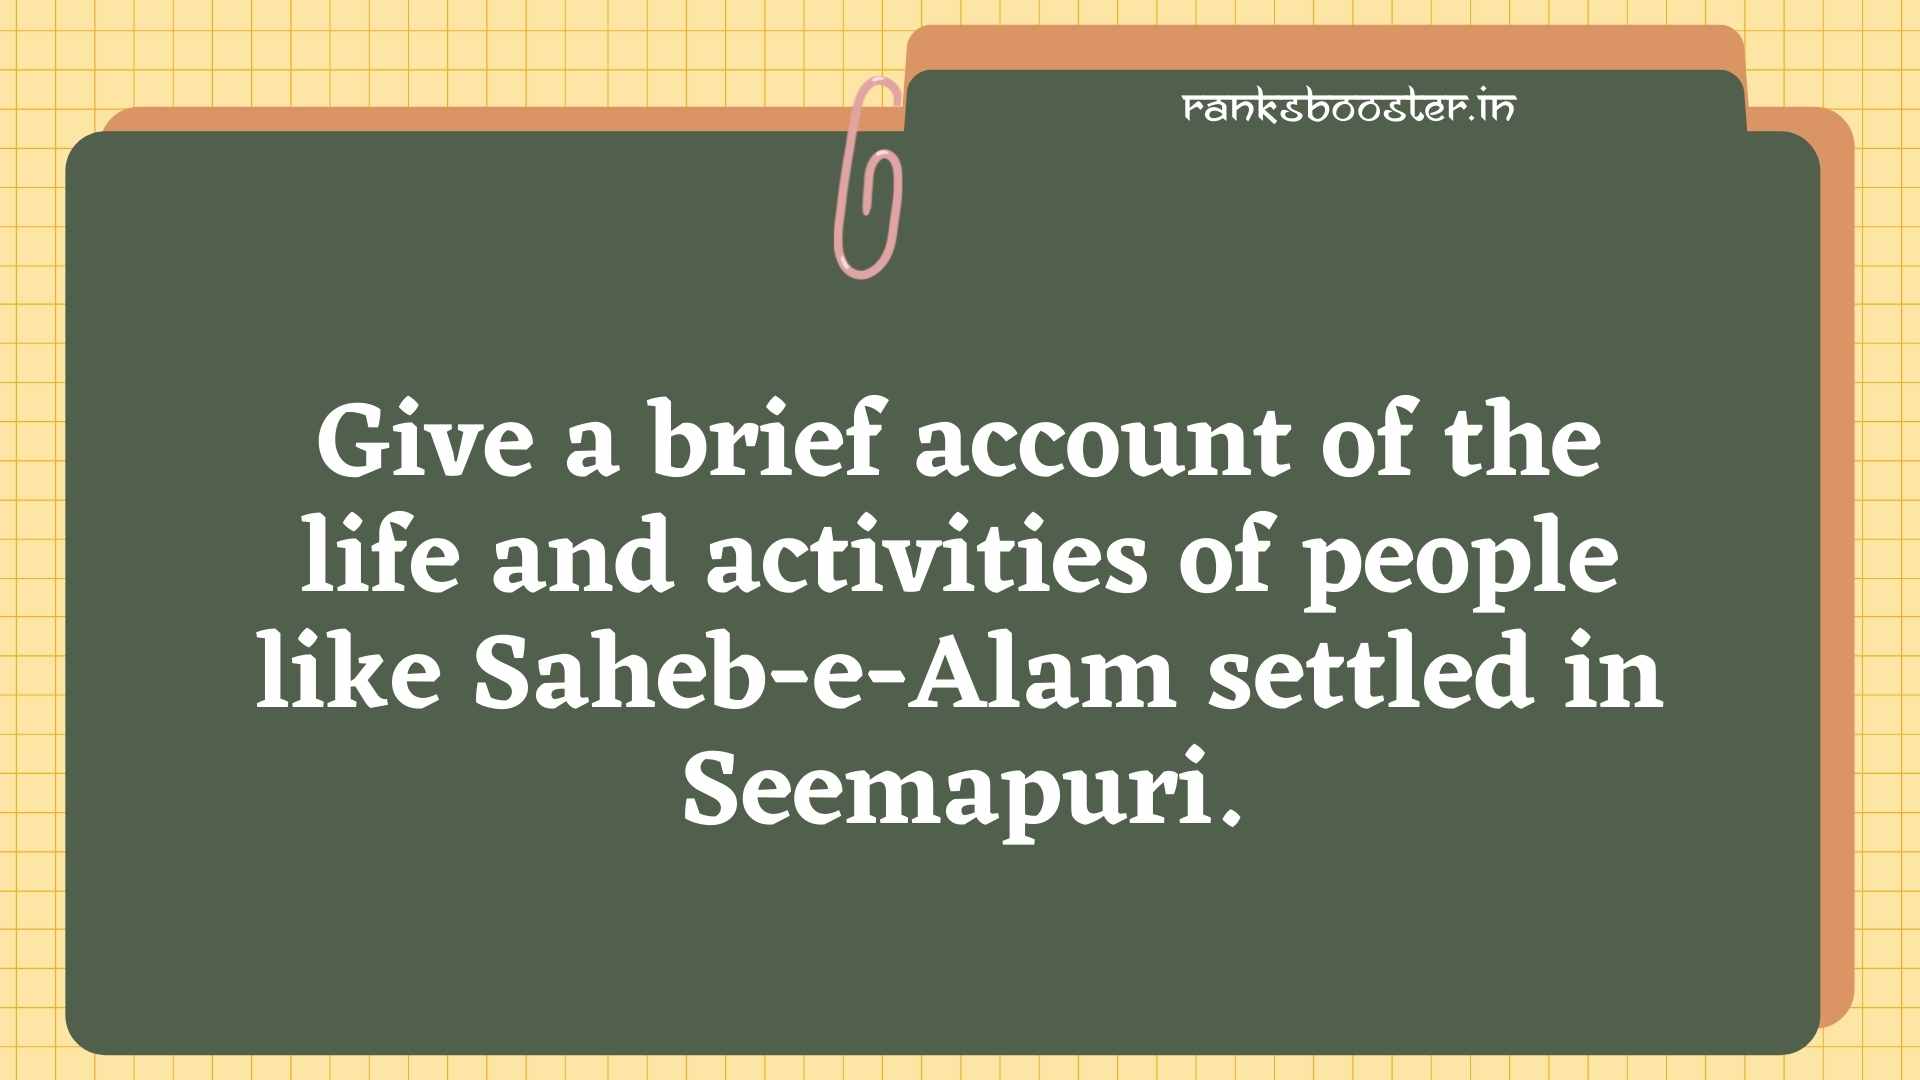 Give a brief account of the life and activities of people like Saheb-e-Alam settled in Seemapuri. [CBSE Delhi 2011]